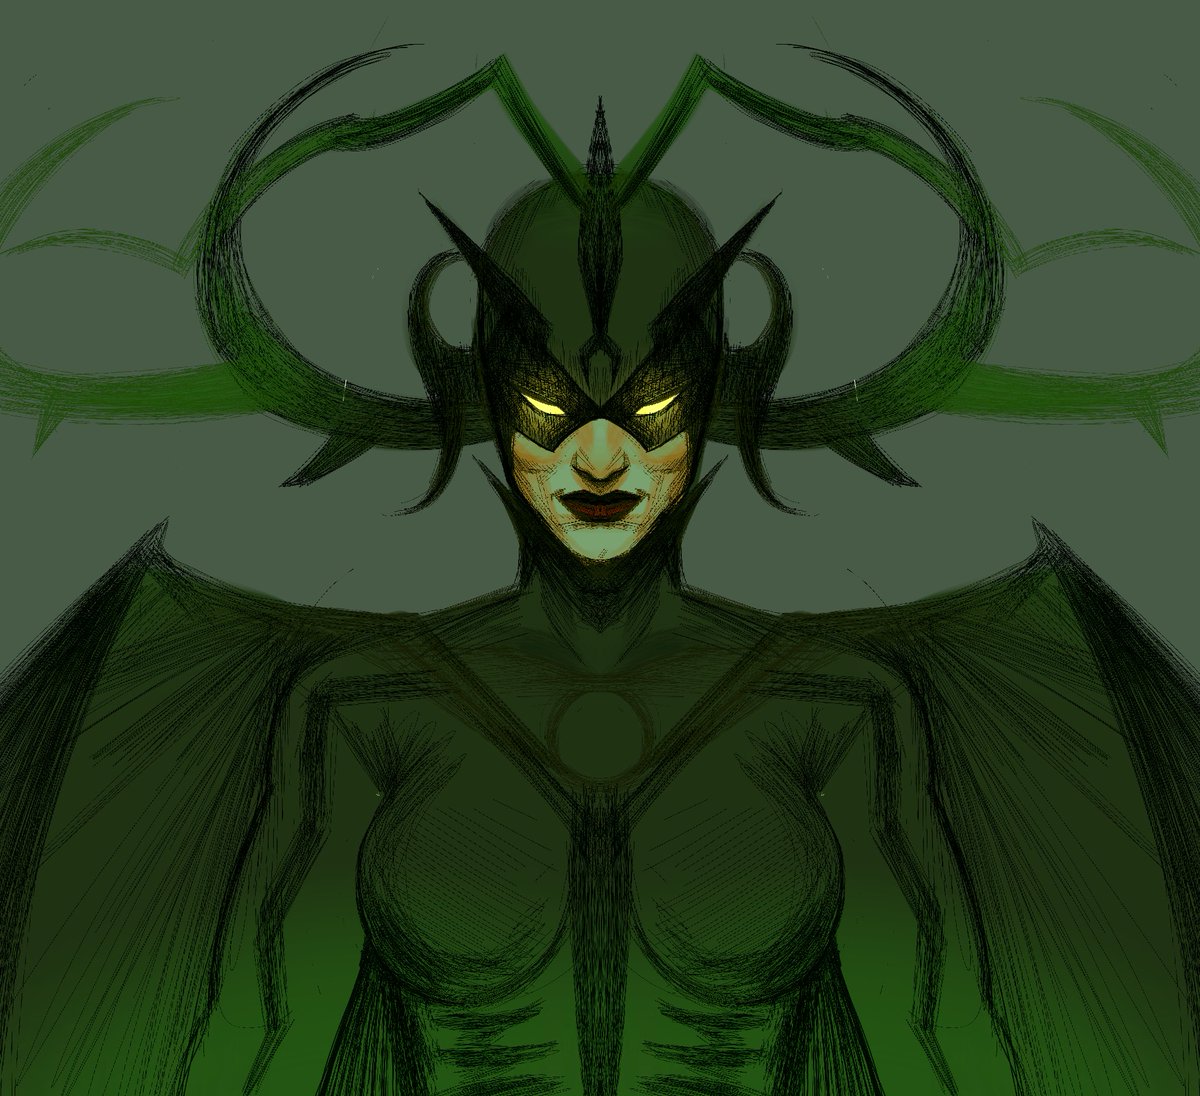 RT @narutosdurag: Threw colors on the Hela I sketched yesterday ! #thor https://t.co/GCWcqcuMU8